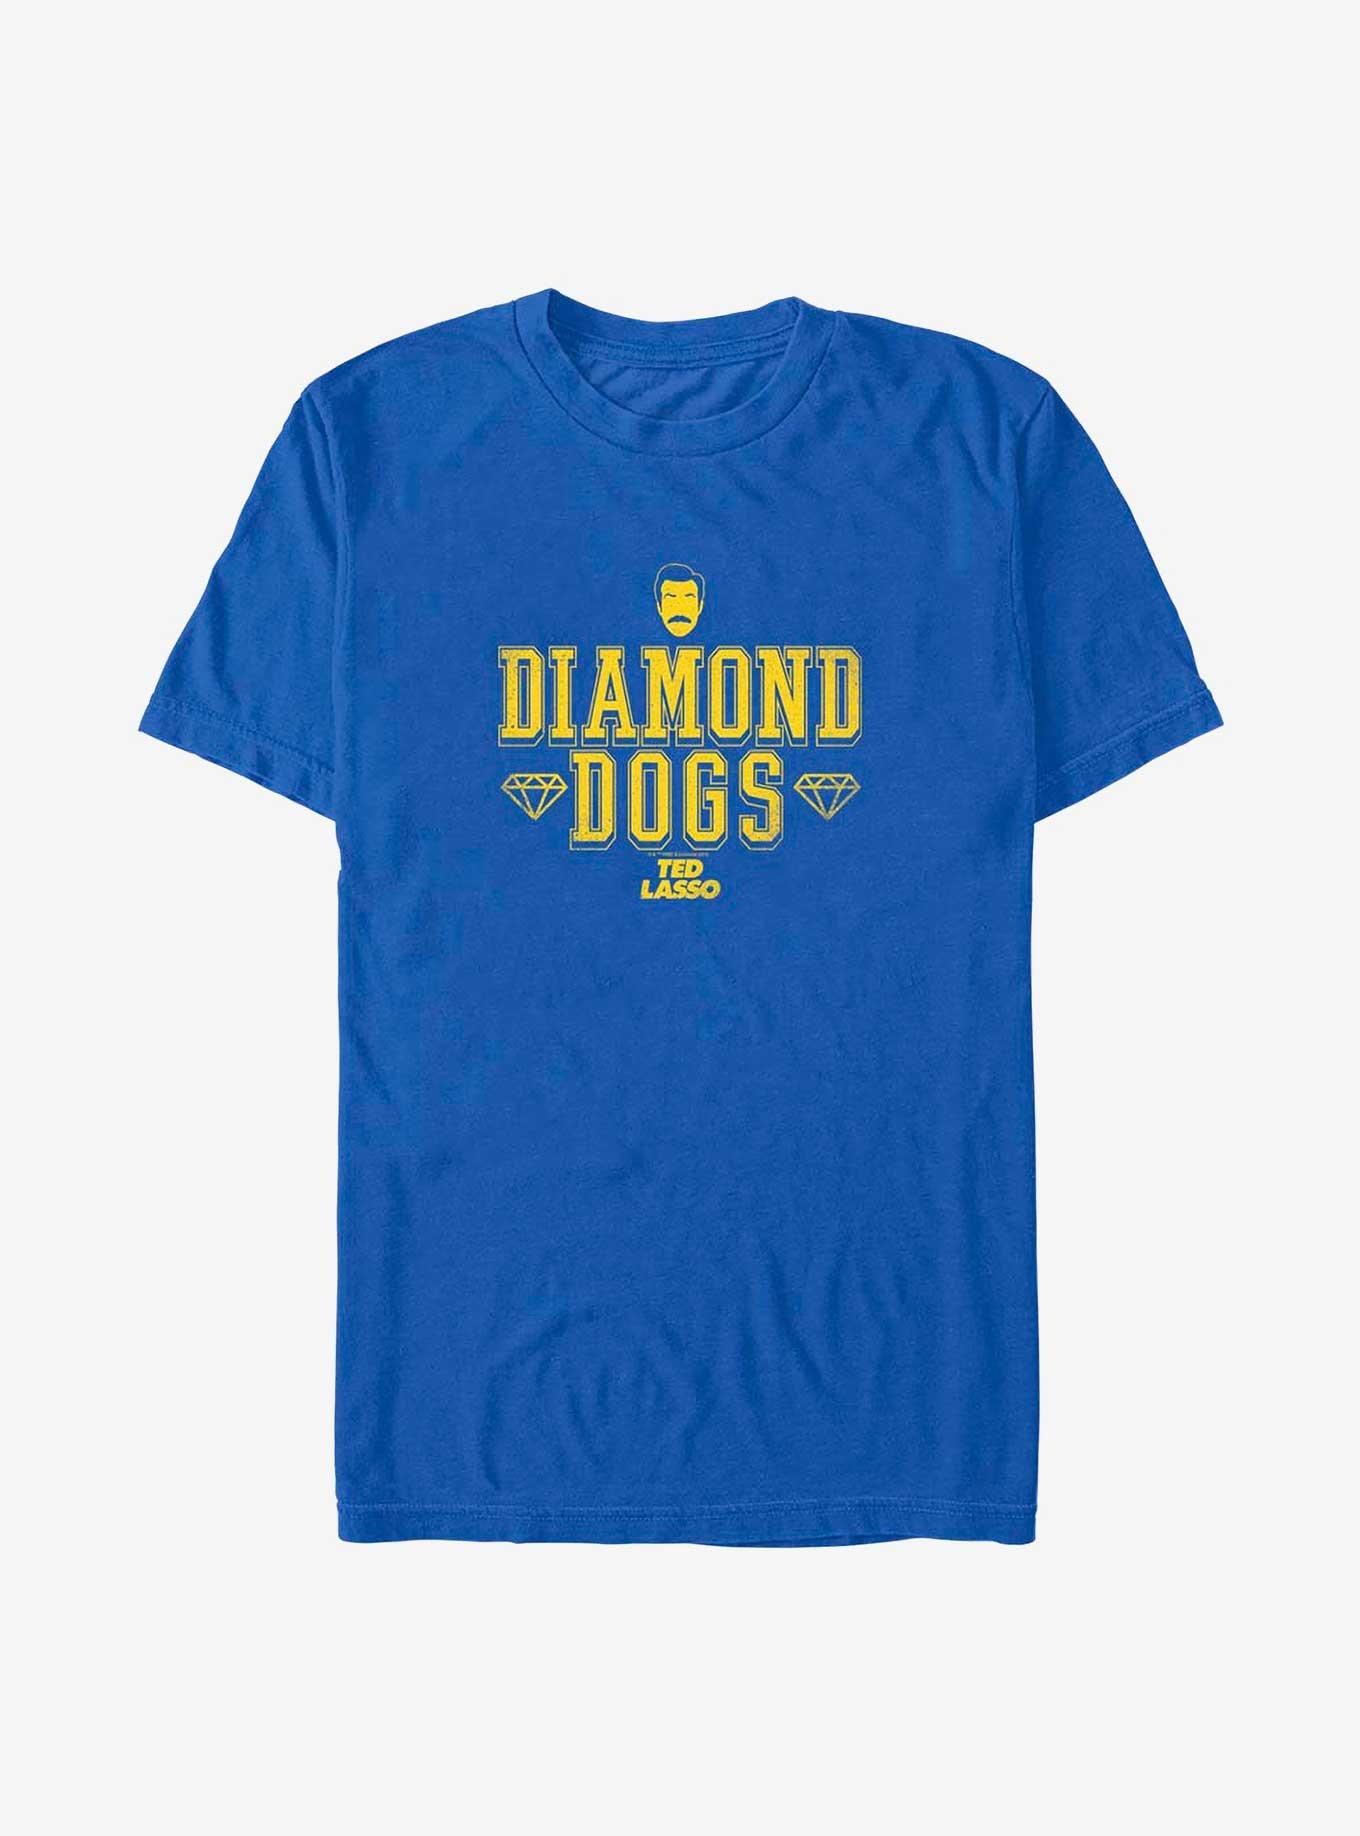 Ted Lasso Diamond Dogs Extra Soft T-Shirt, ROYAL, hi-res